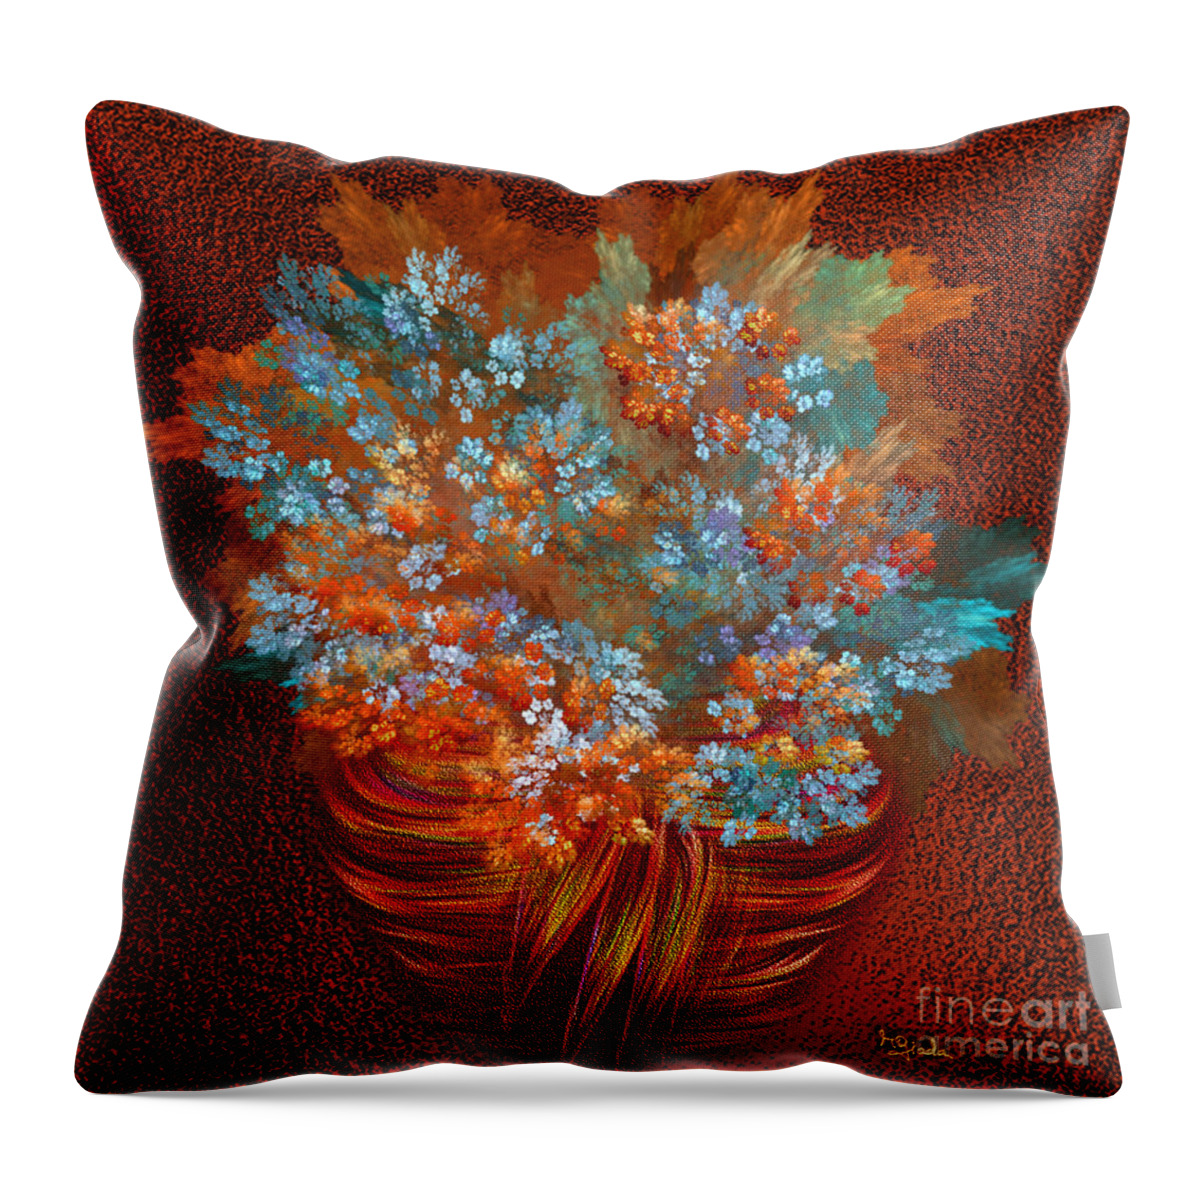 A Gift Of Joy Throw Pillow featuring the digital art Optimistic art - A gift of joy by RGiada by Giada Rossi